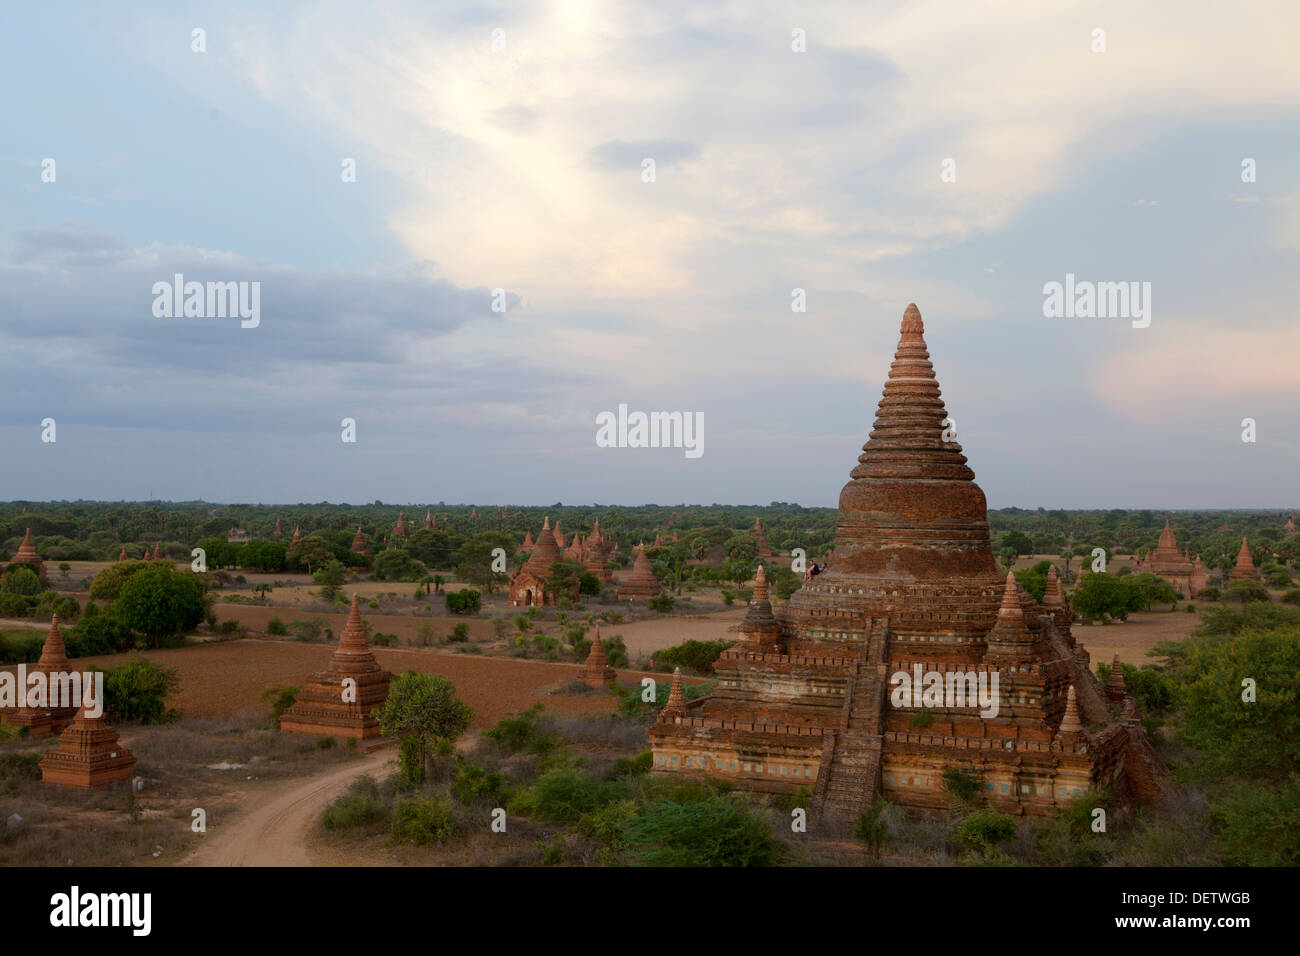 A view from Buledi Temple in the central plain of Bagan, Burma. Stock Photo